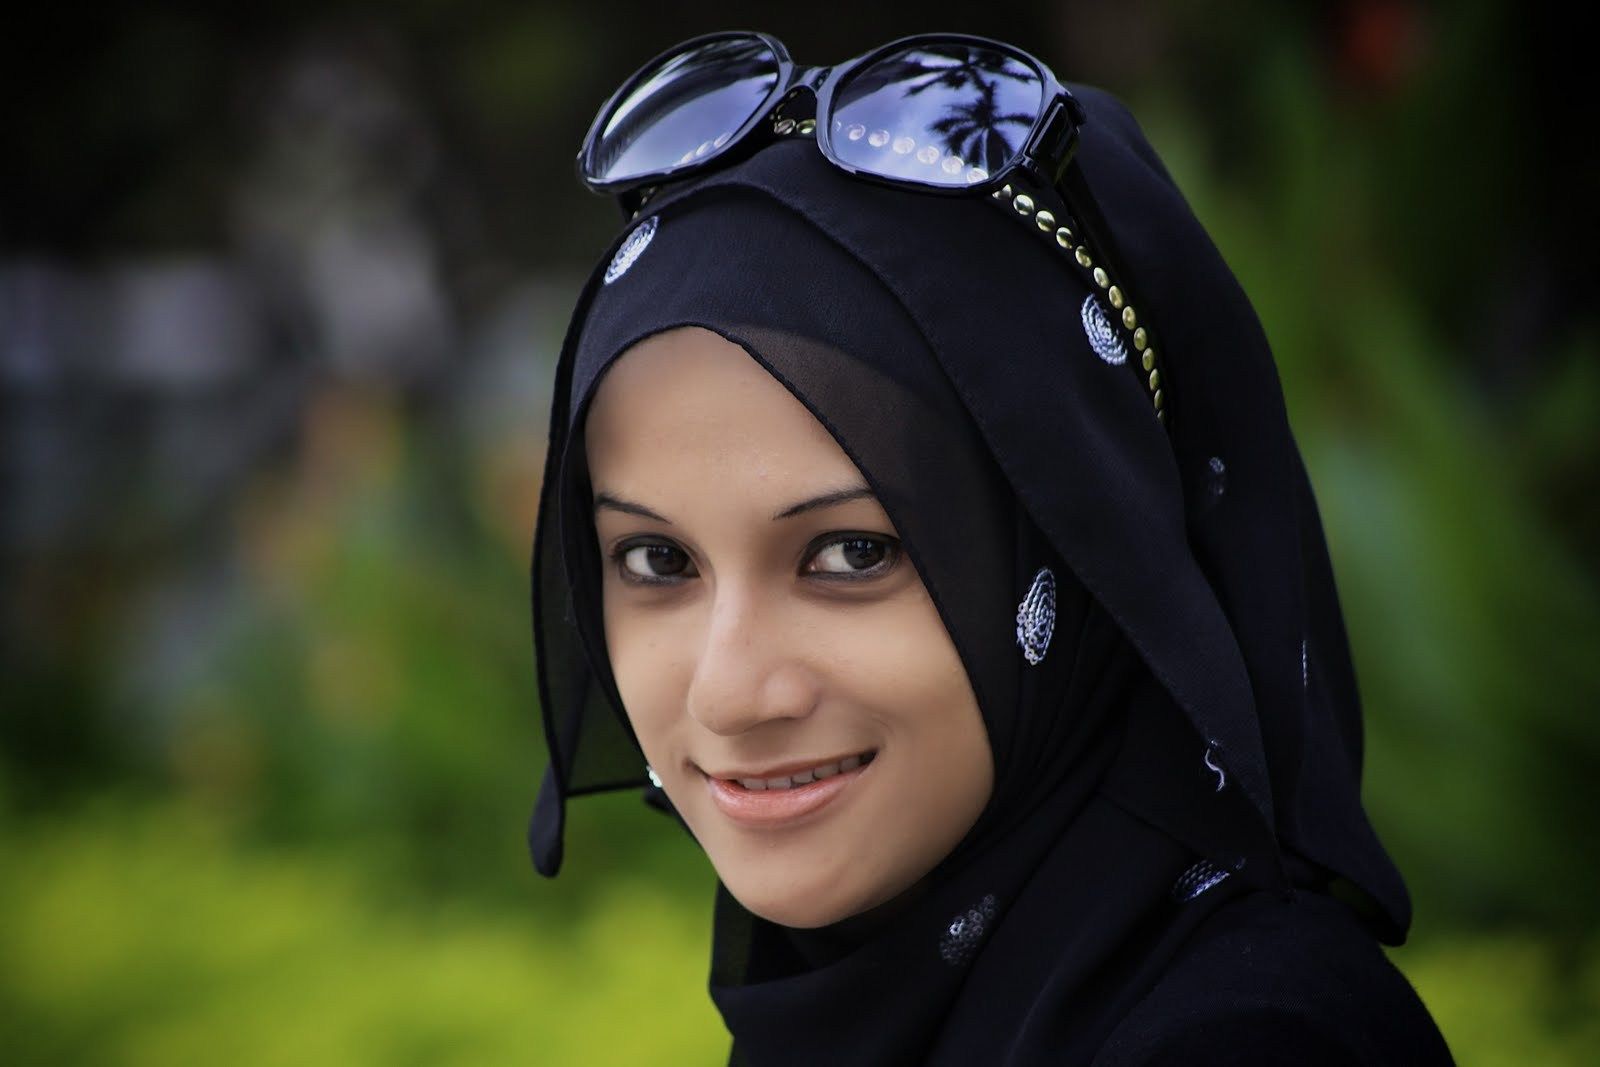 The Muslim Girl who Ranks Among The world's Most Famous Faces, see